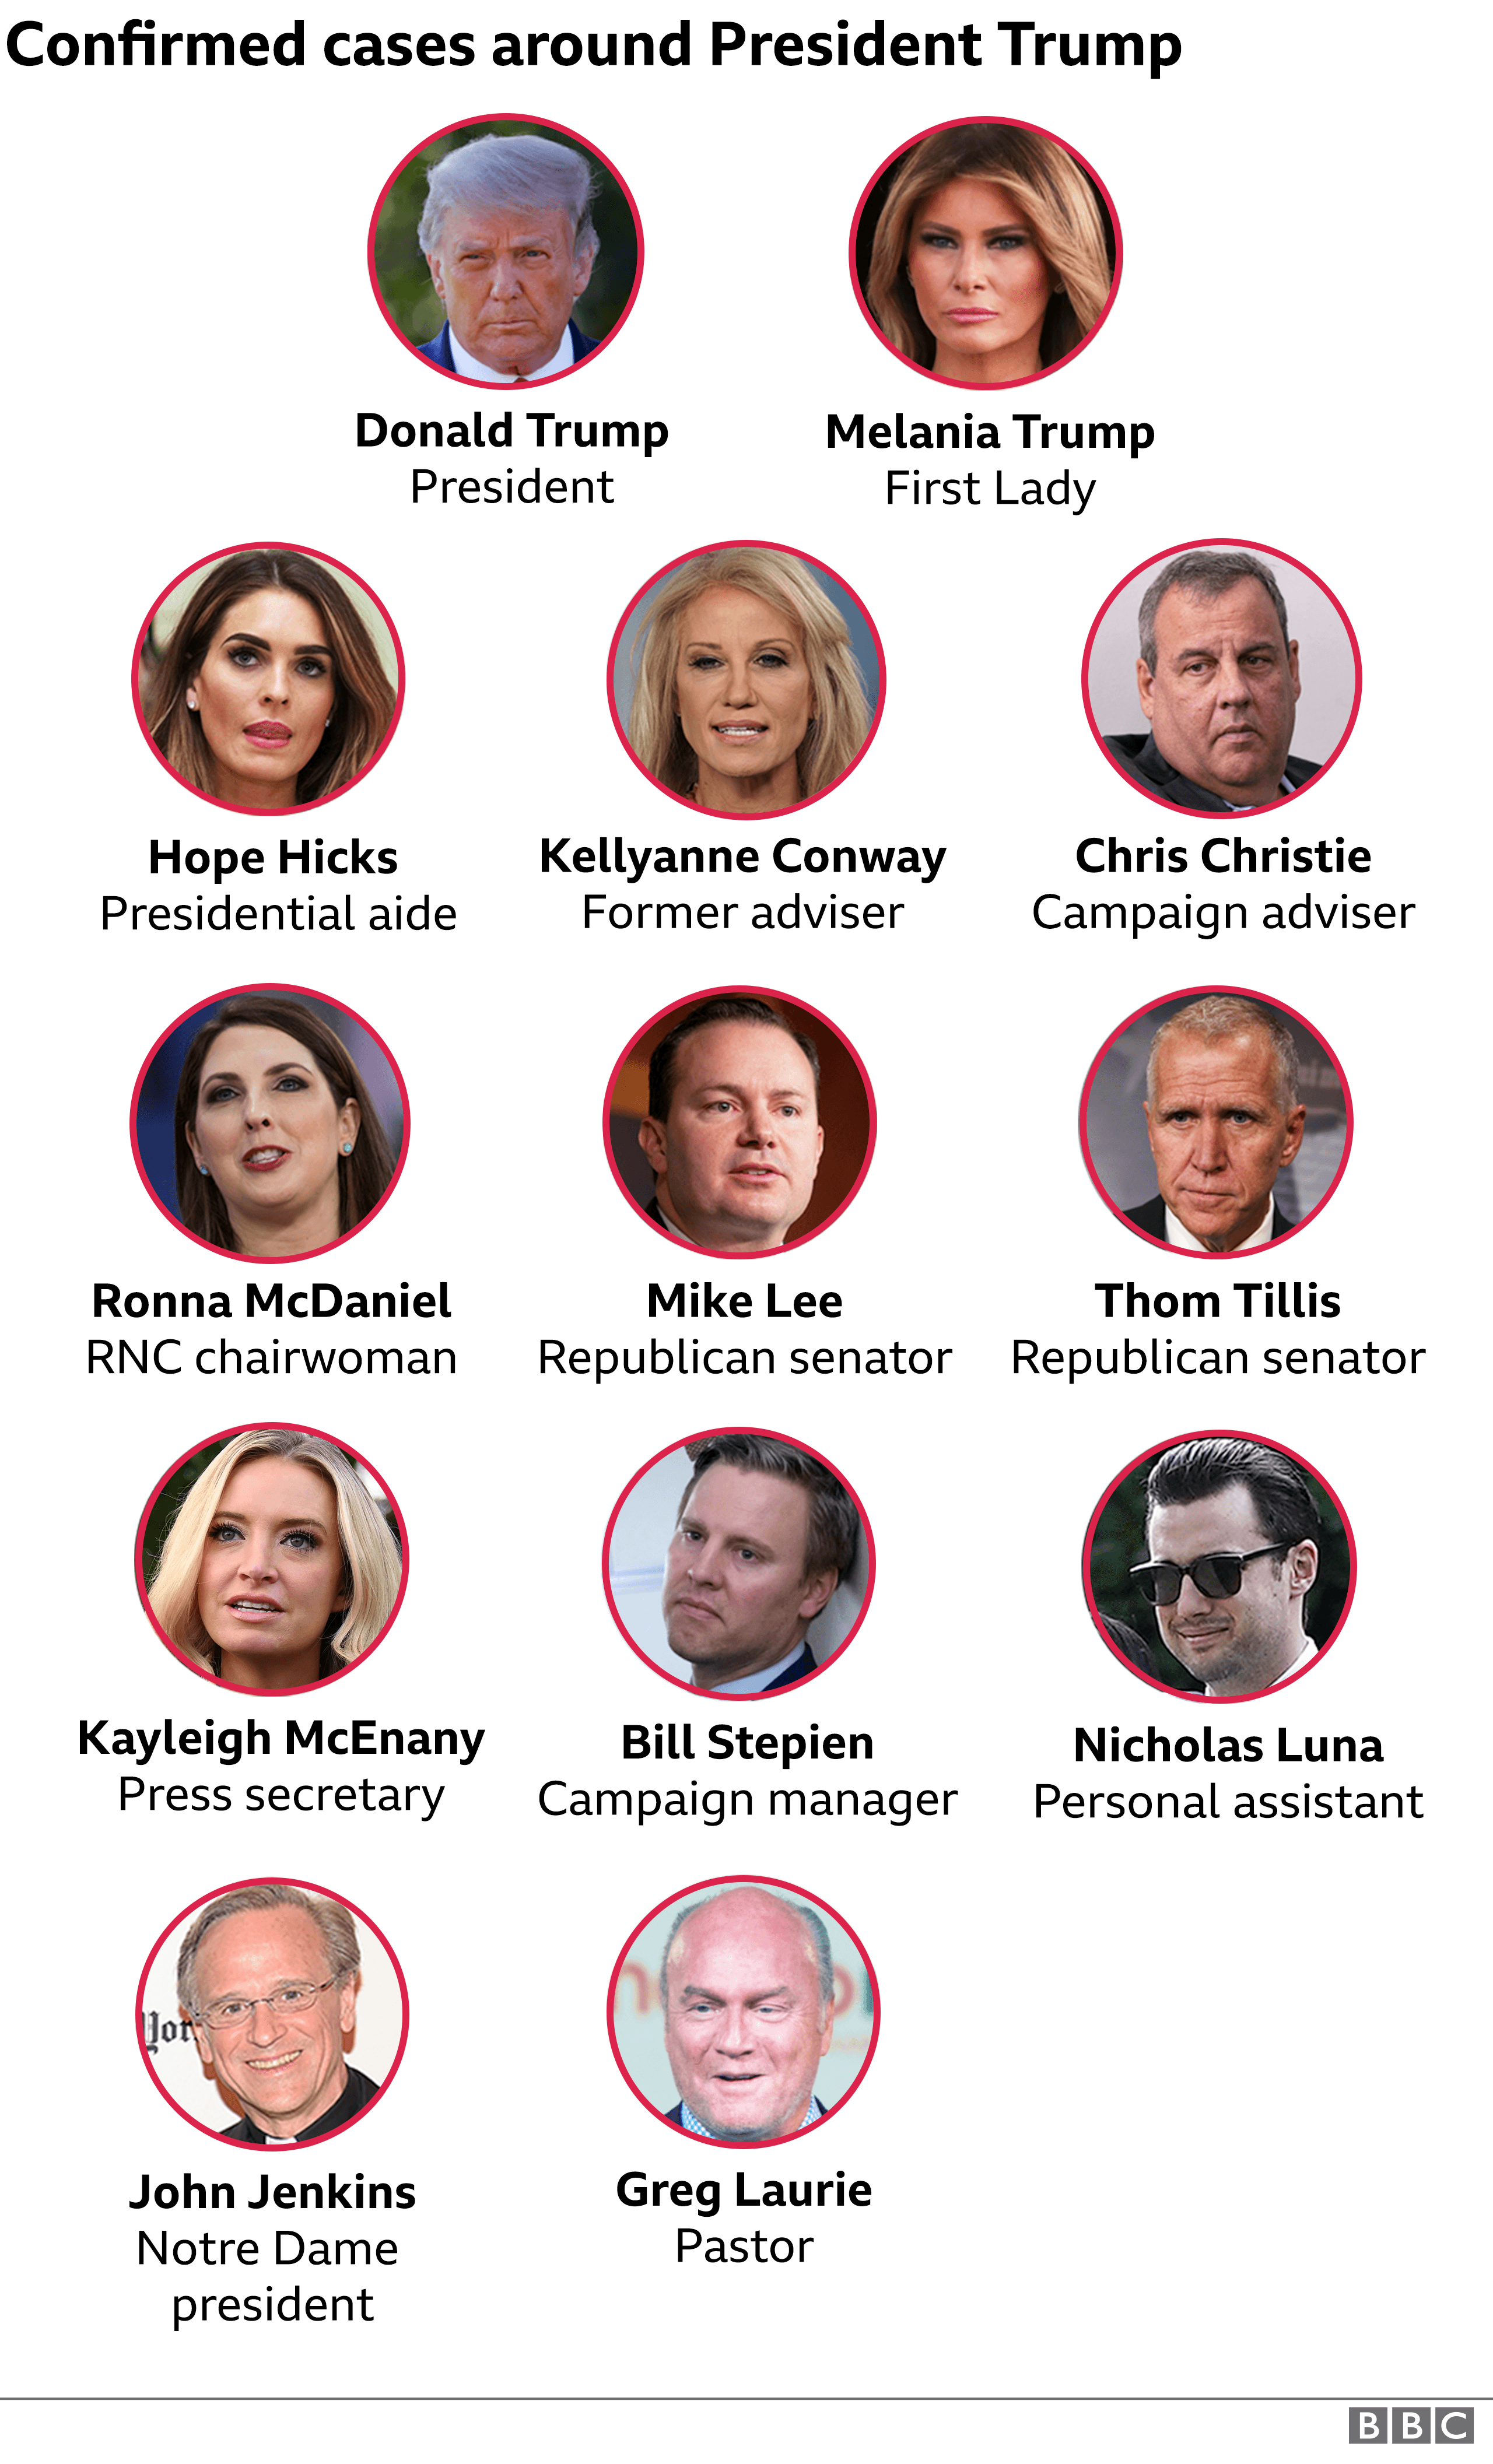 Graphic shows who in Trump's circle has caught Covid-19